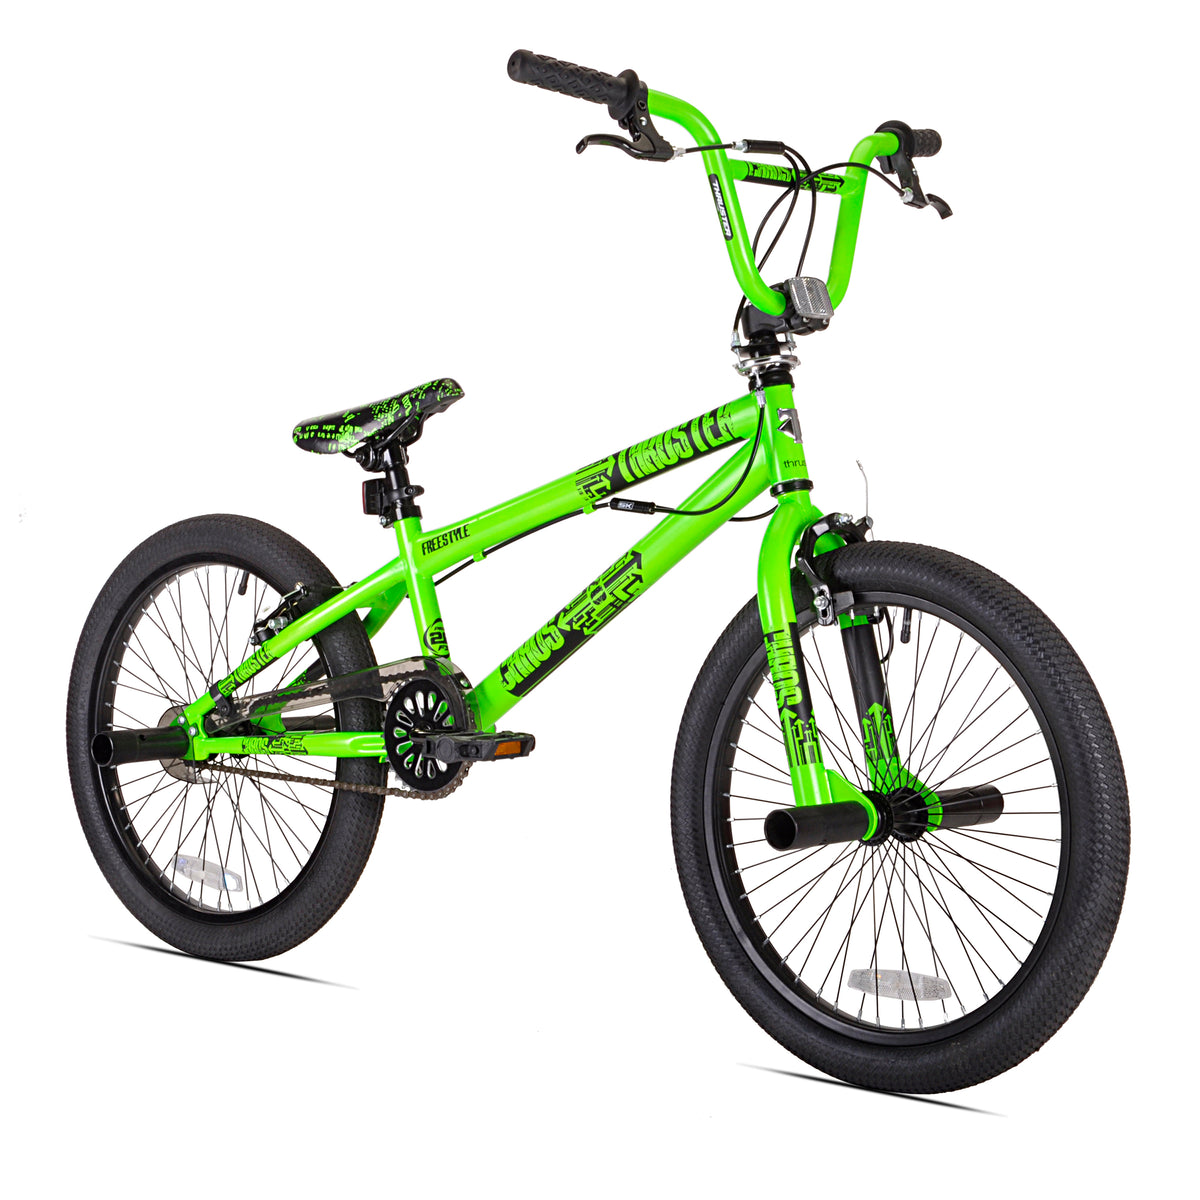 20" Thruster Chaos | BMX Bike for Kids Ages 7-13